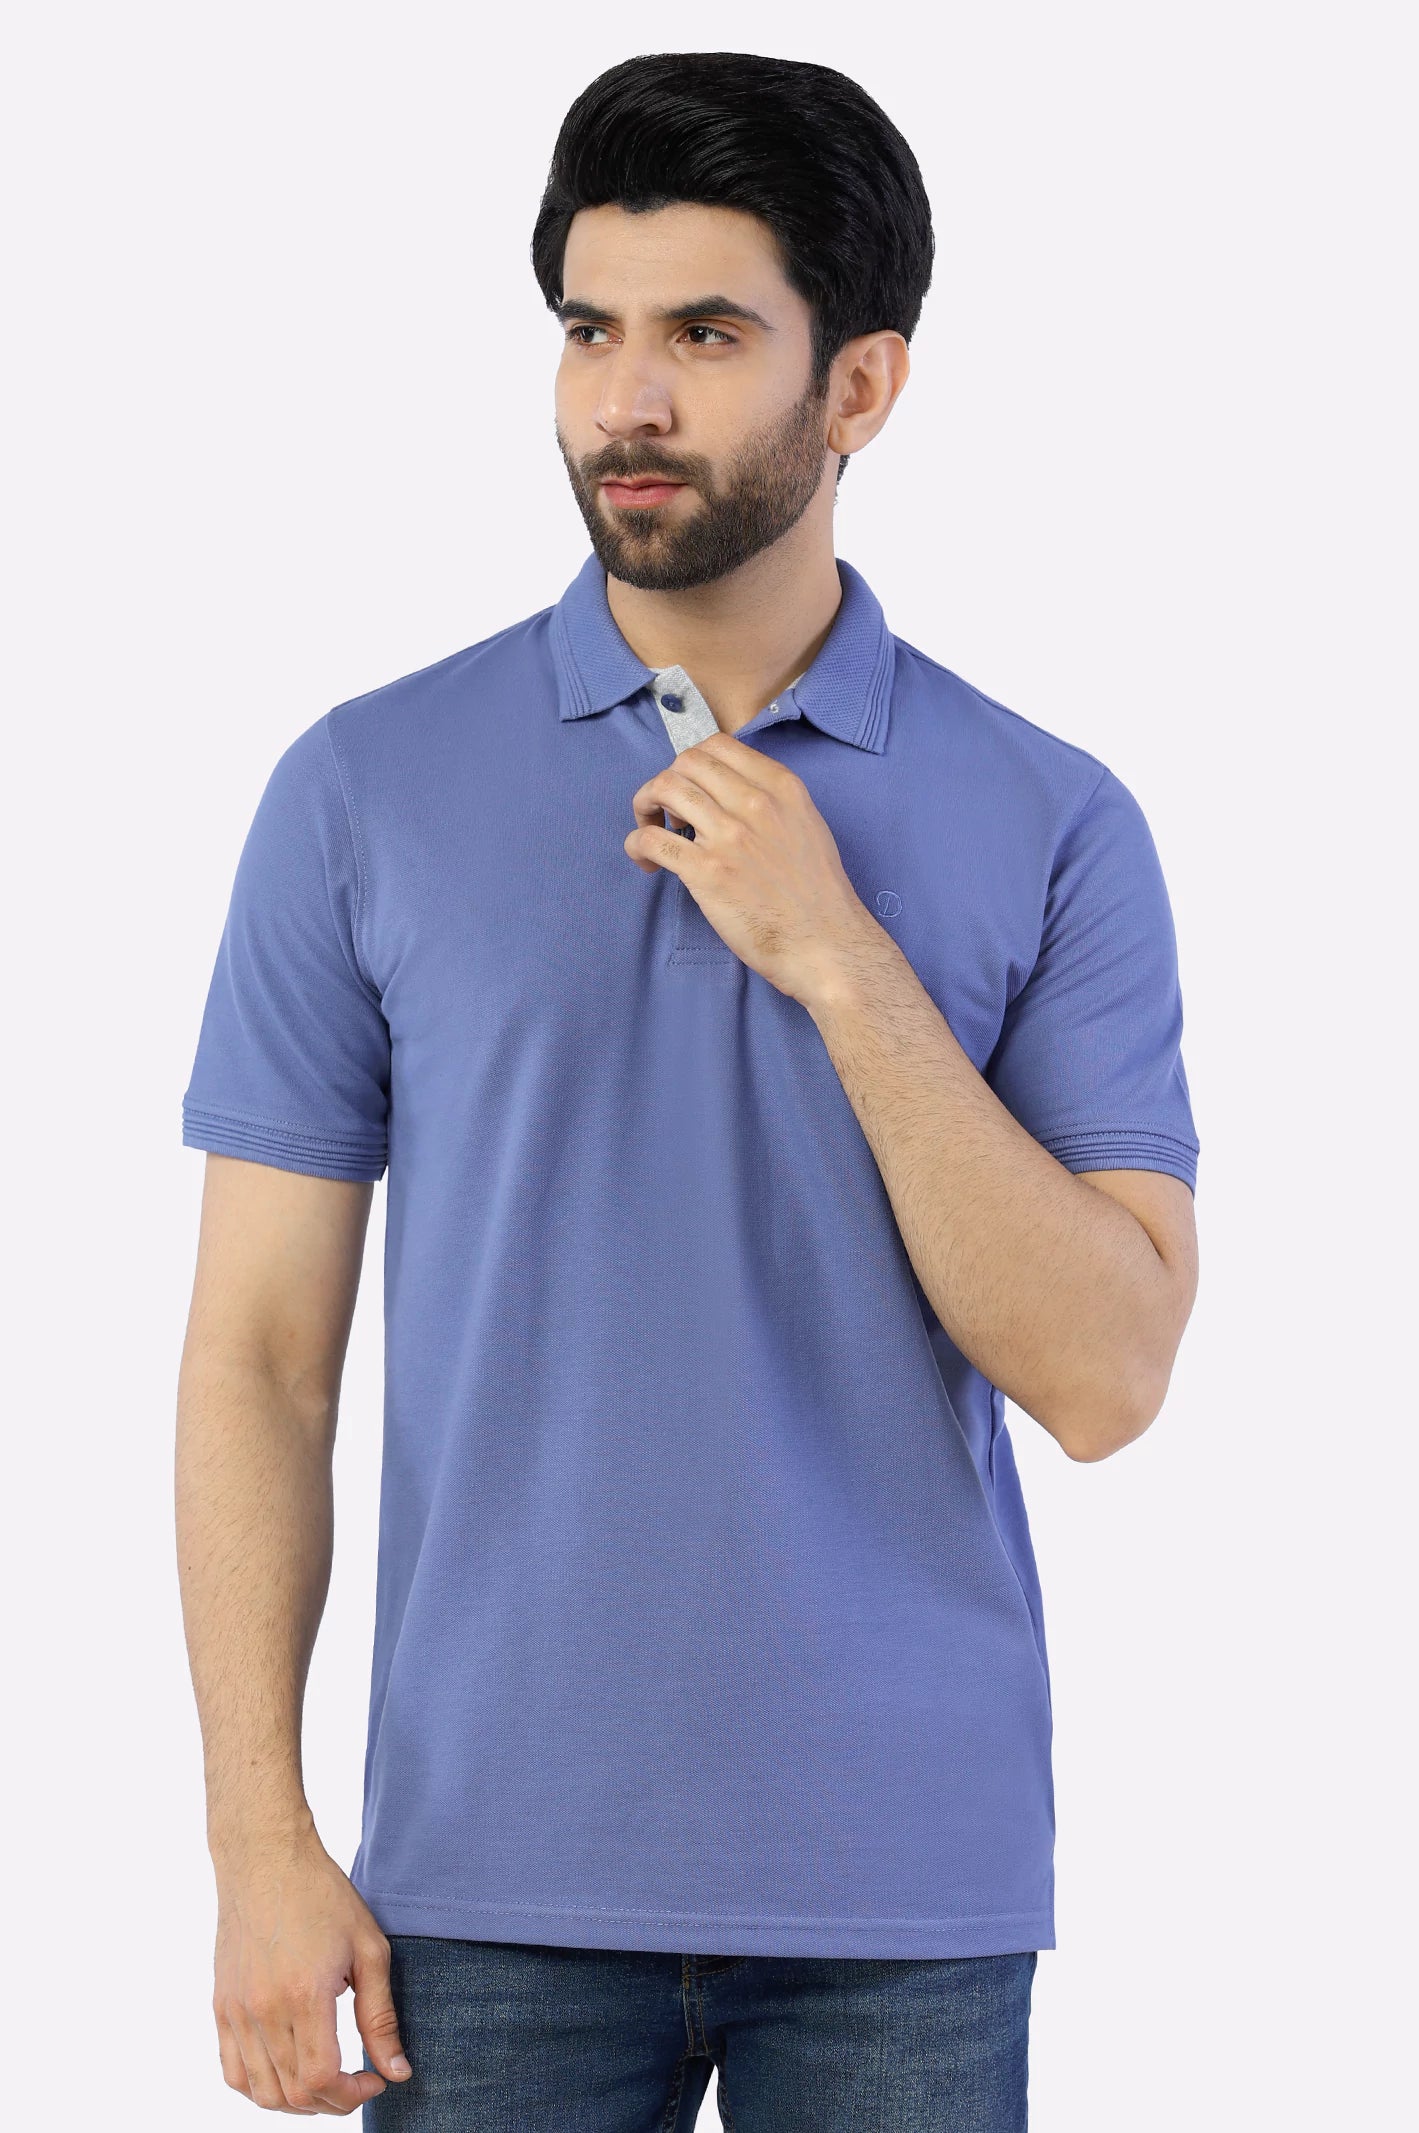 Purple Jacquard Collar Polo From Diners